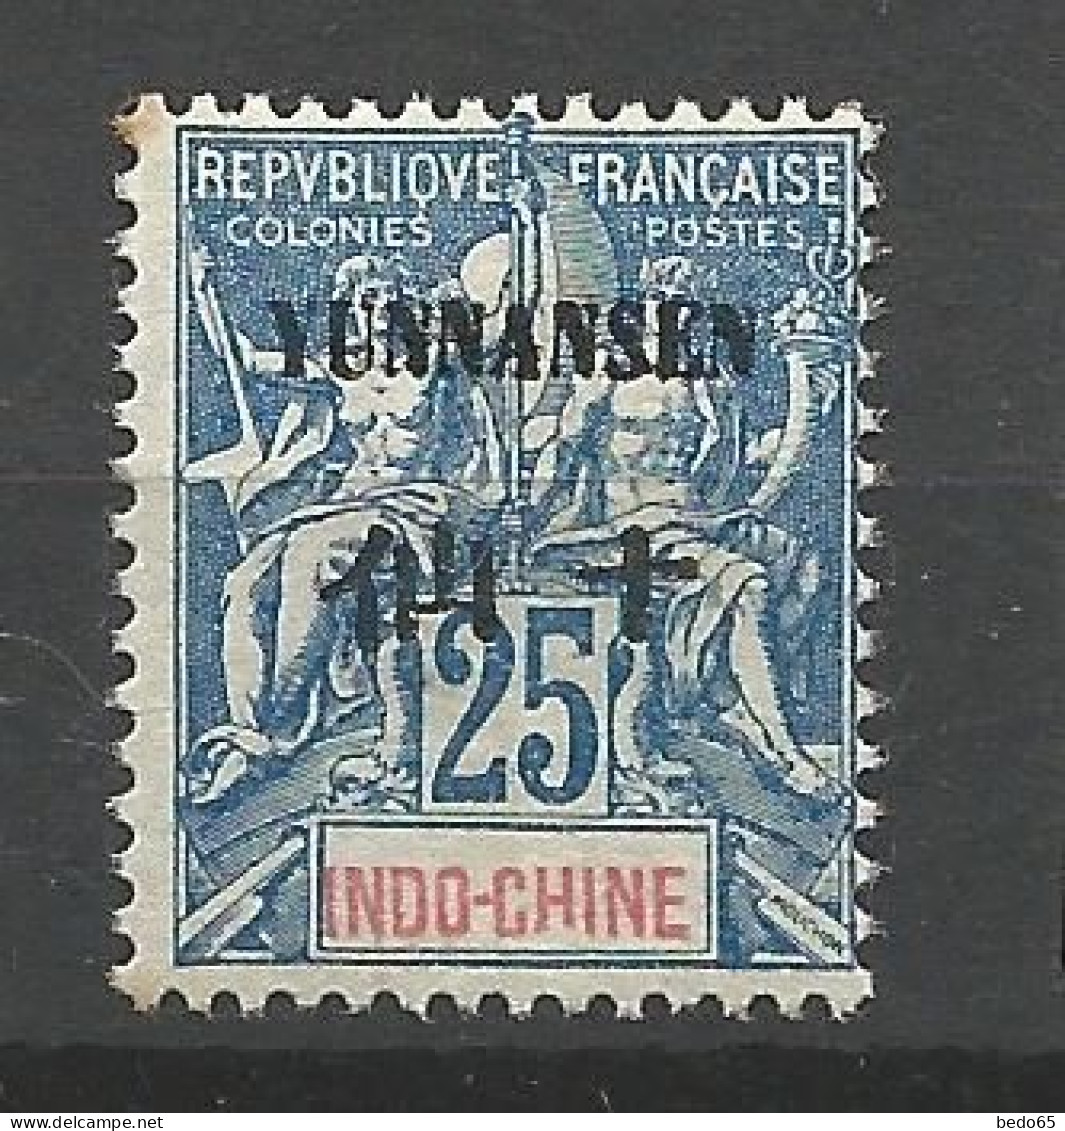 YUNNANFOU N° 8 NEUF* CHARNIERE   / Hinge / MH - Unused Stamps